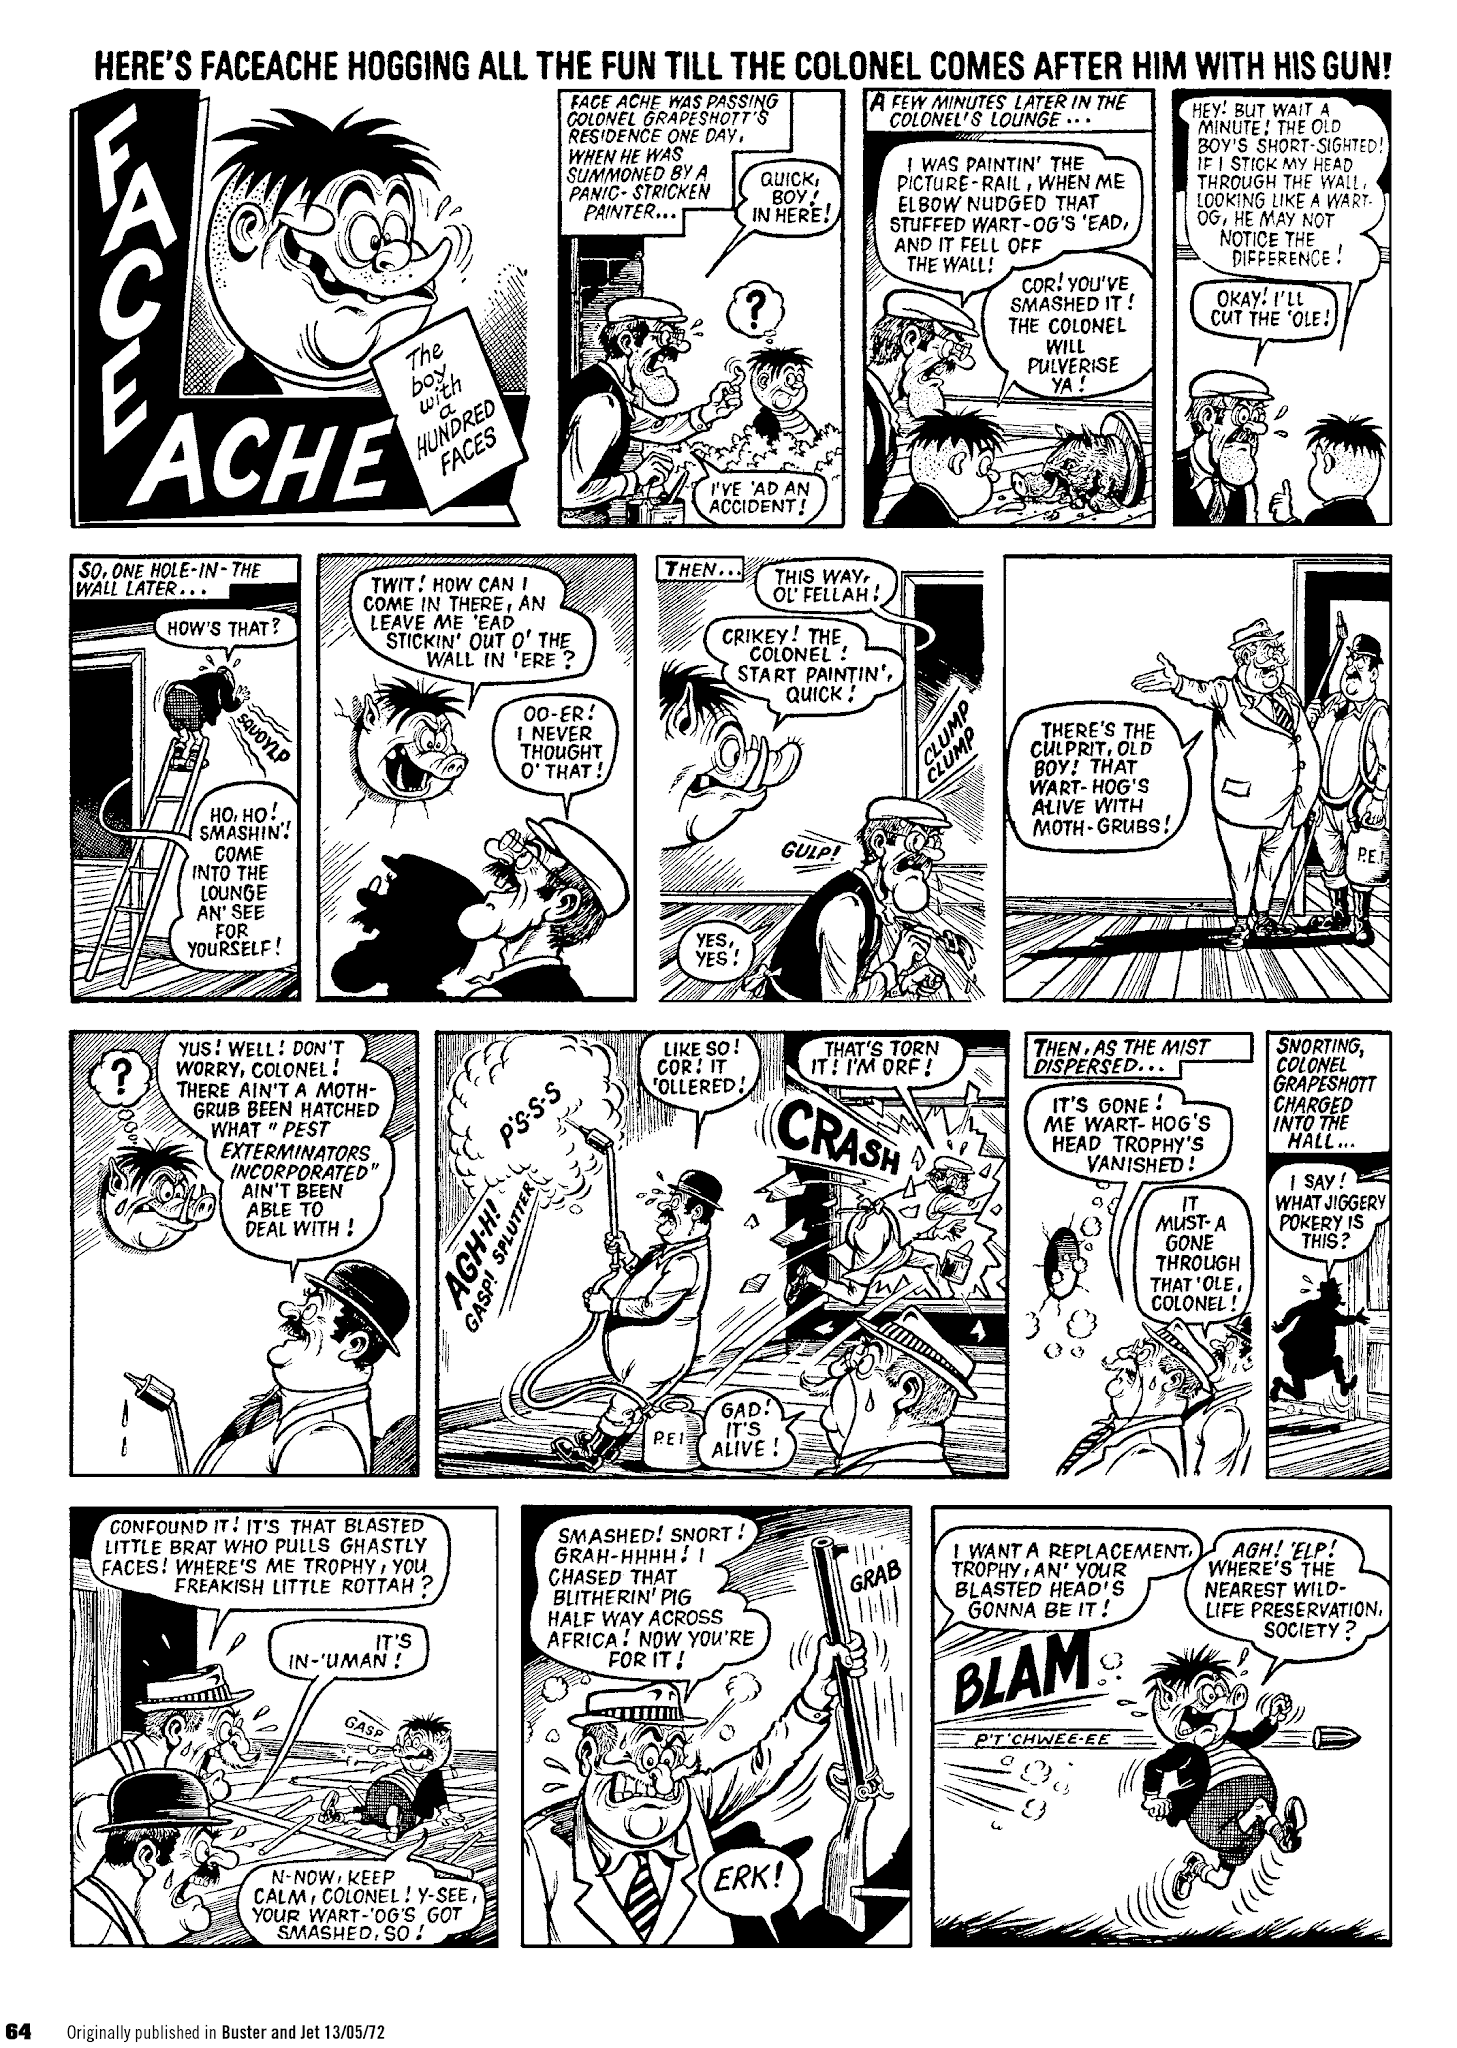 Read online Faceache: The First Hundred Scrunges comic -  Issue # TPB 1 - 66